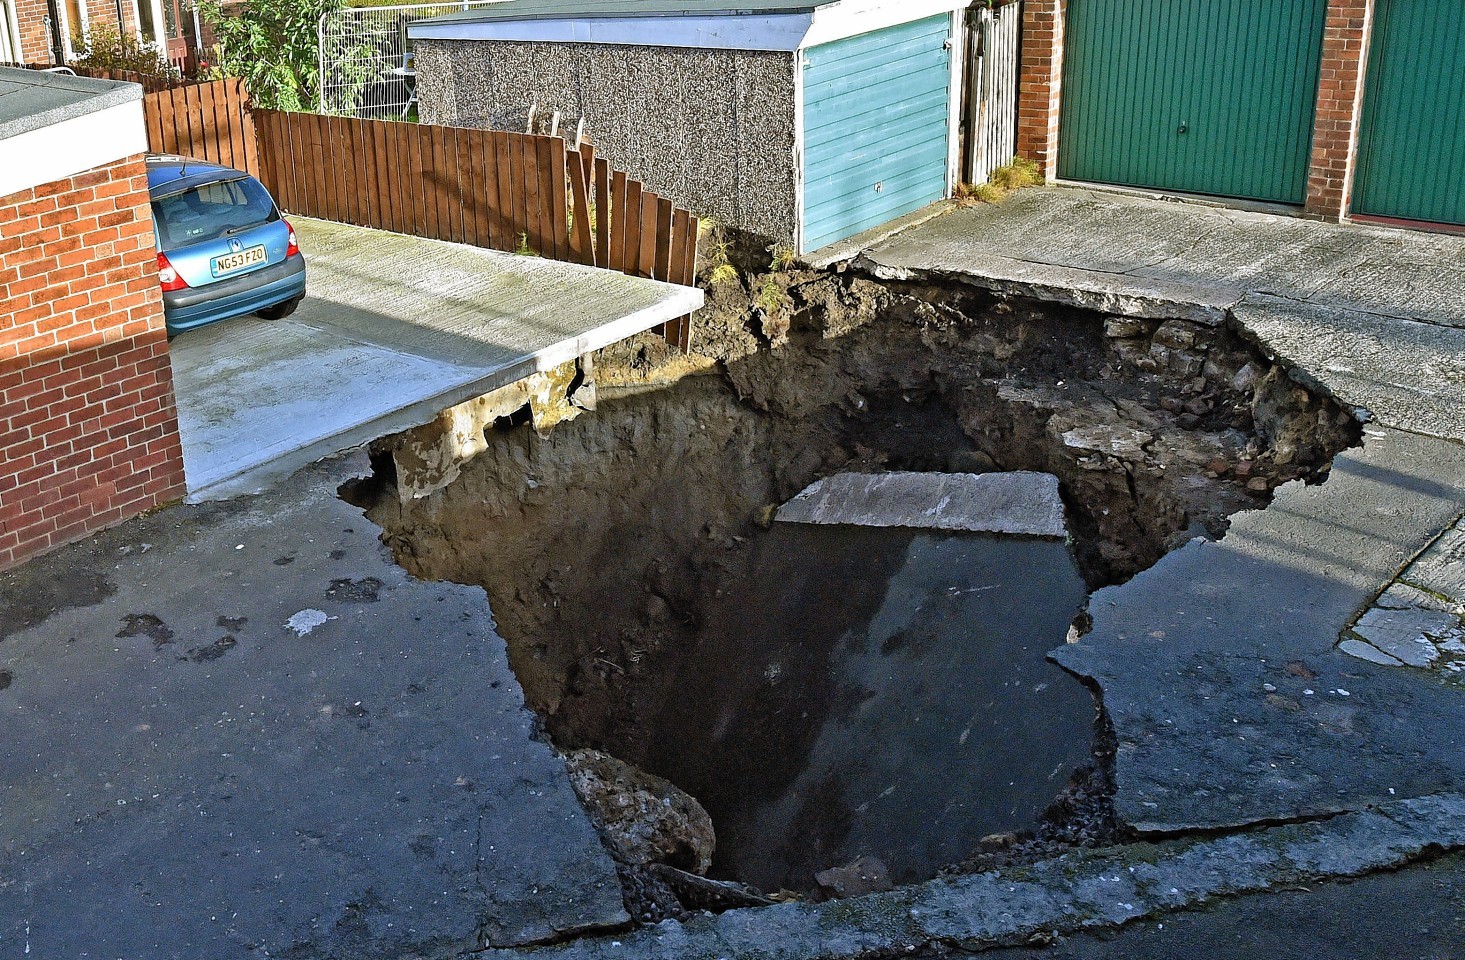 A 20ft (6m) sinkhole opened up